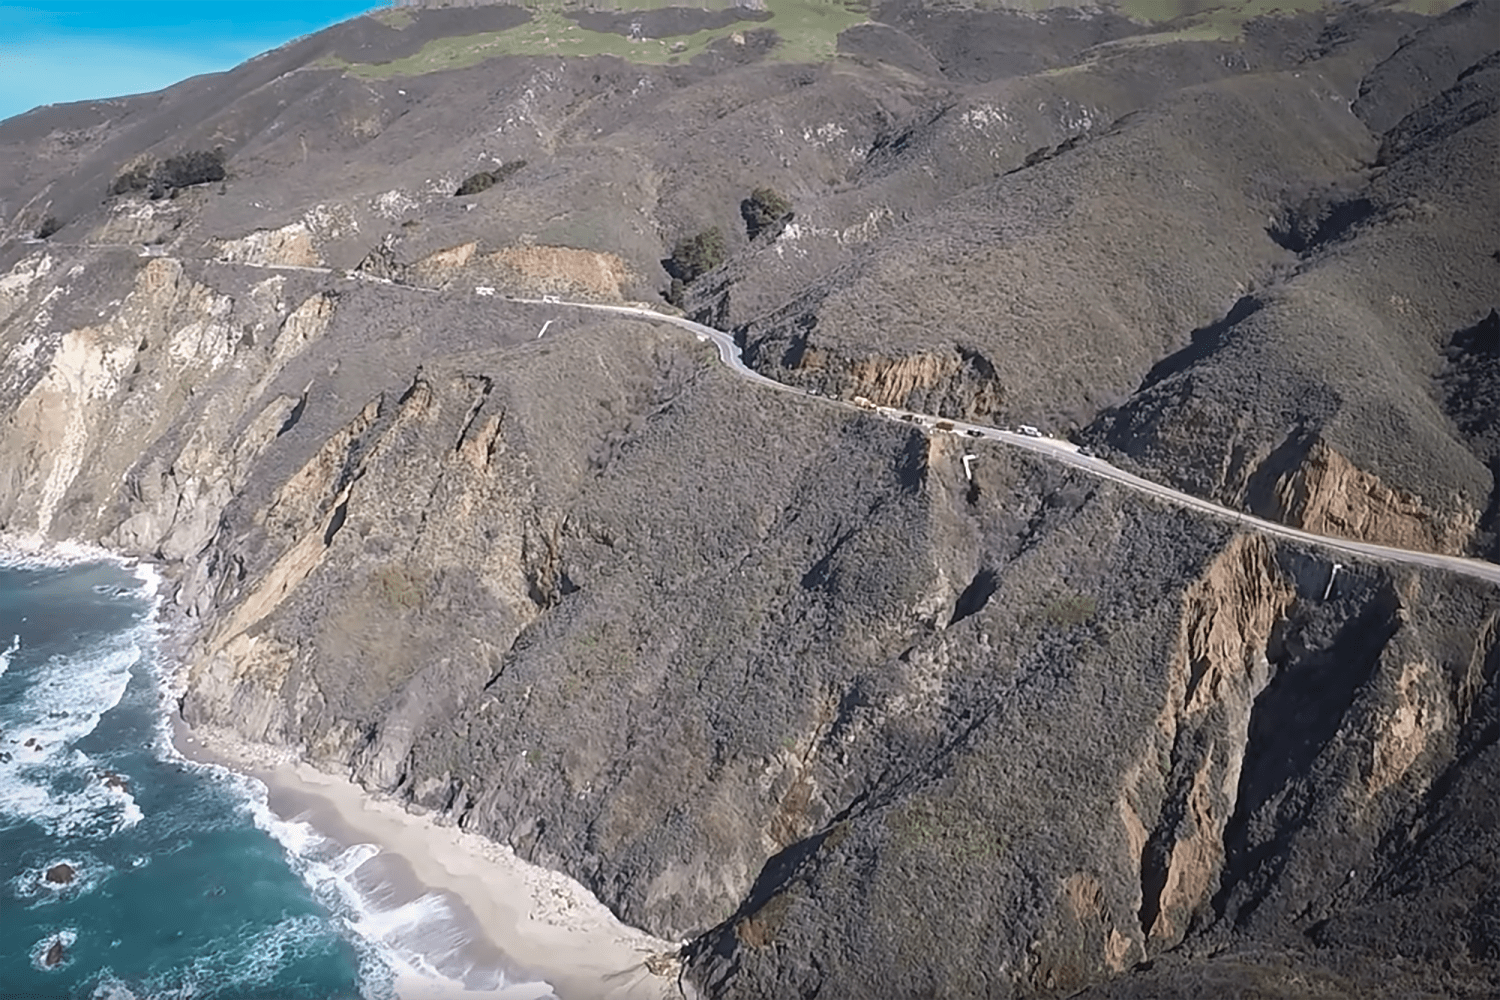 Man rescued 2 days after accidentally plunging 400 feet over California cliffside